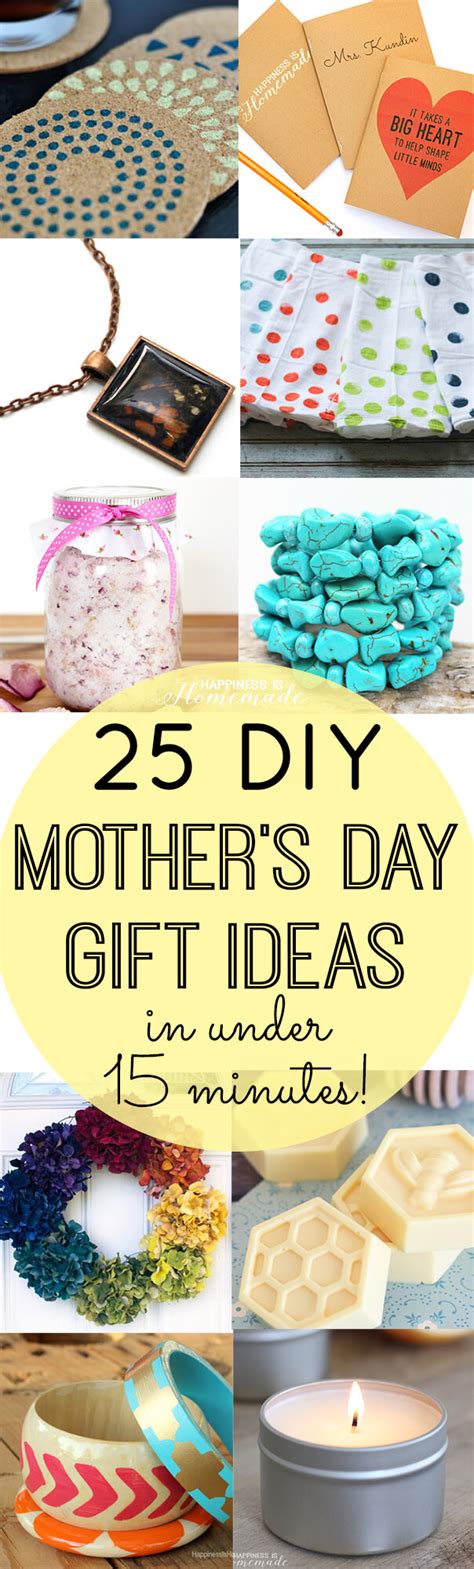 These easy and thoughtful diy mother's day gifts are special, but don't require much money and can be made at the last minute. DIY Mother's Day Gifts in Under 15 Minutes! - Happiness is ...